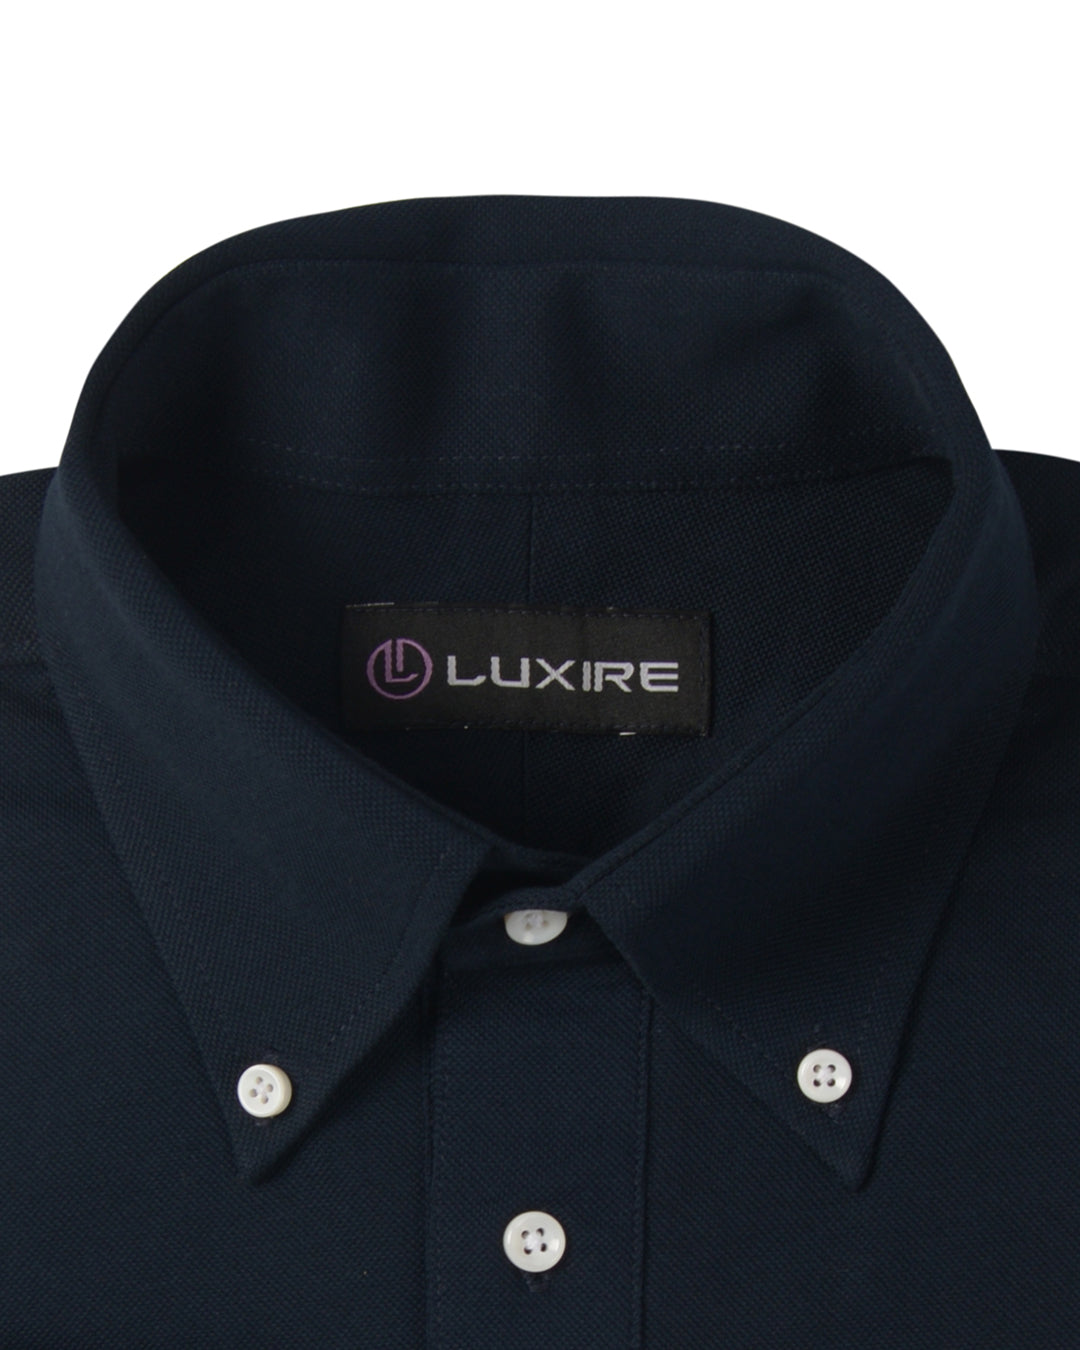 Collar of the custom oxford polo shirt for men by Luxire in midnight navy